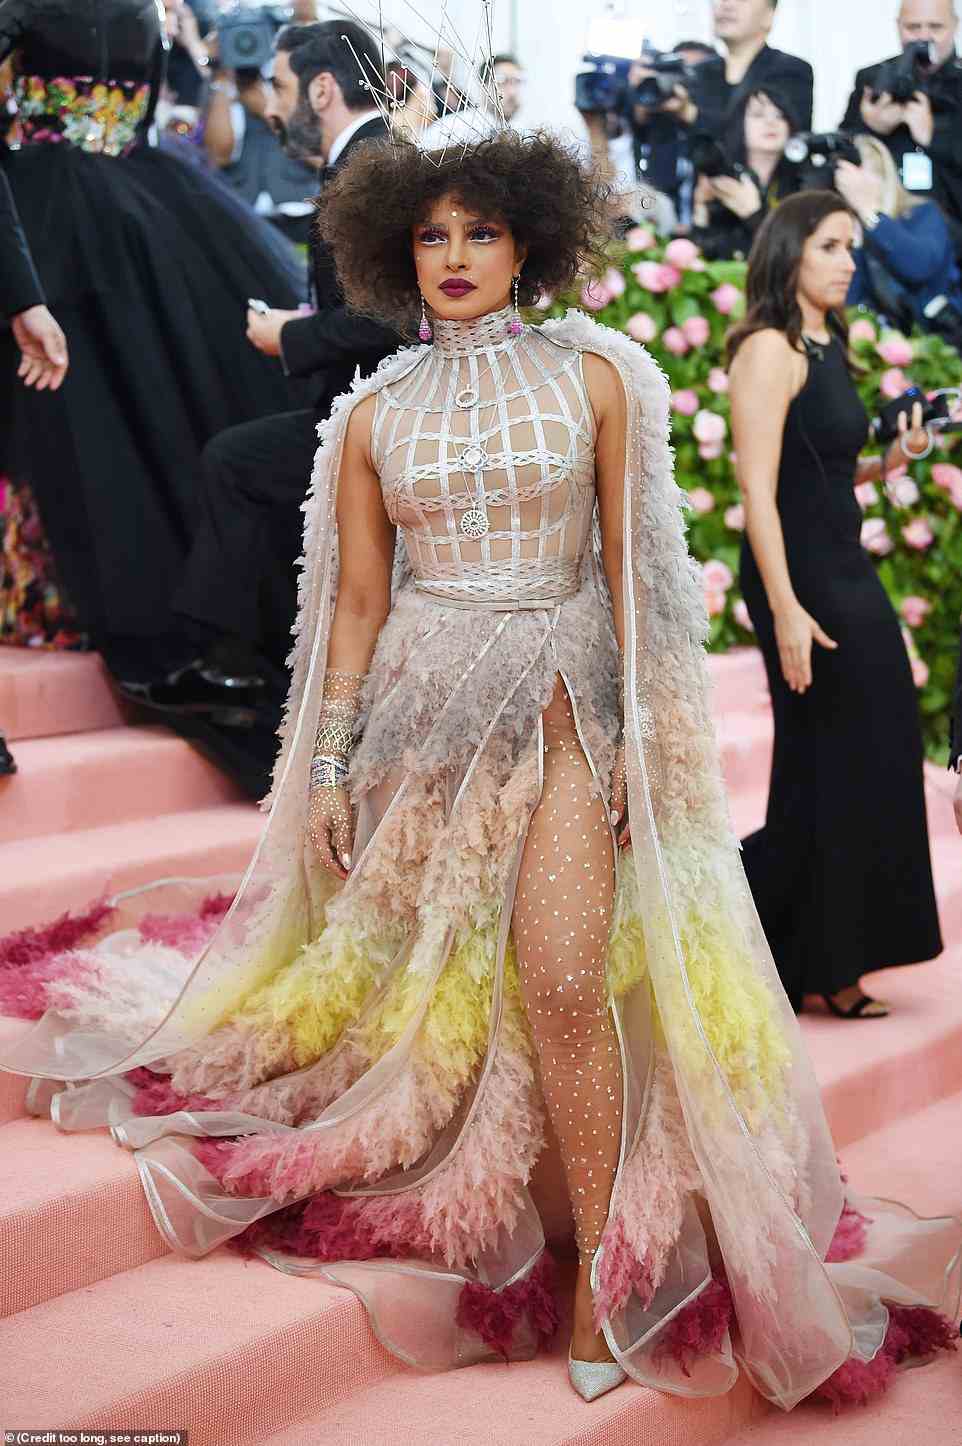 Priyanka Chopra's Dior Couture gown in 2019 took over 1,500 hours to create